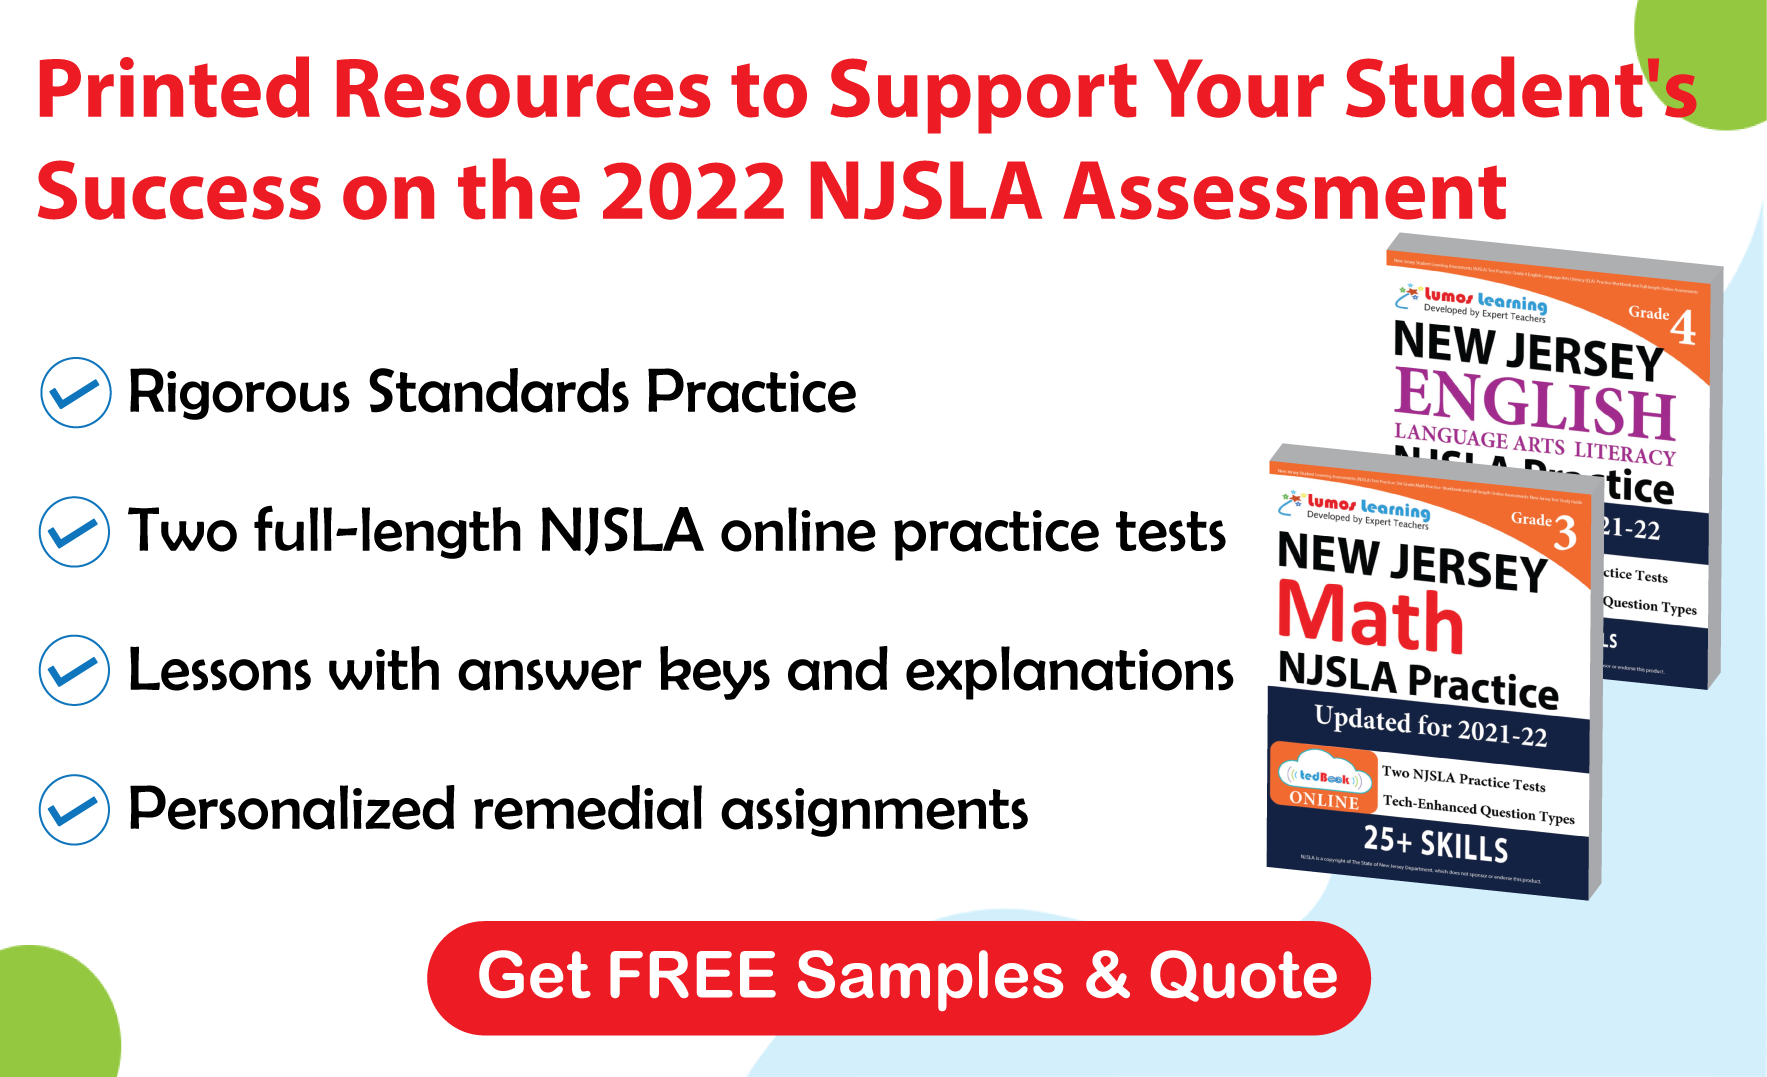 Lumos tedBook™ offers both Math and ELA printed workbooks, that are specifically designed to improve student achievement and help them succeed on the NJSLA Assessments.